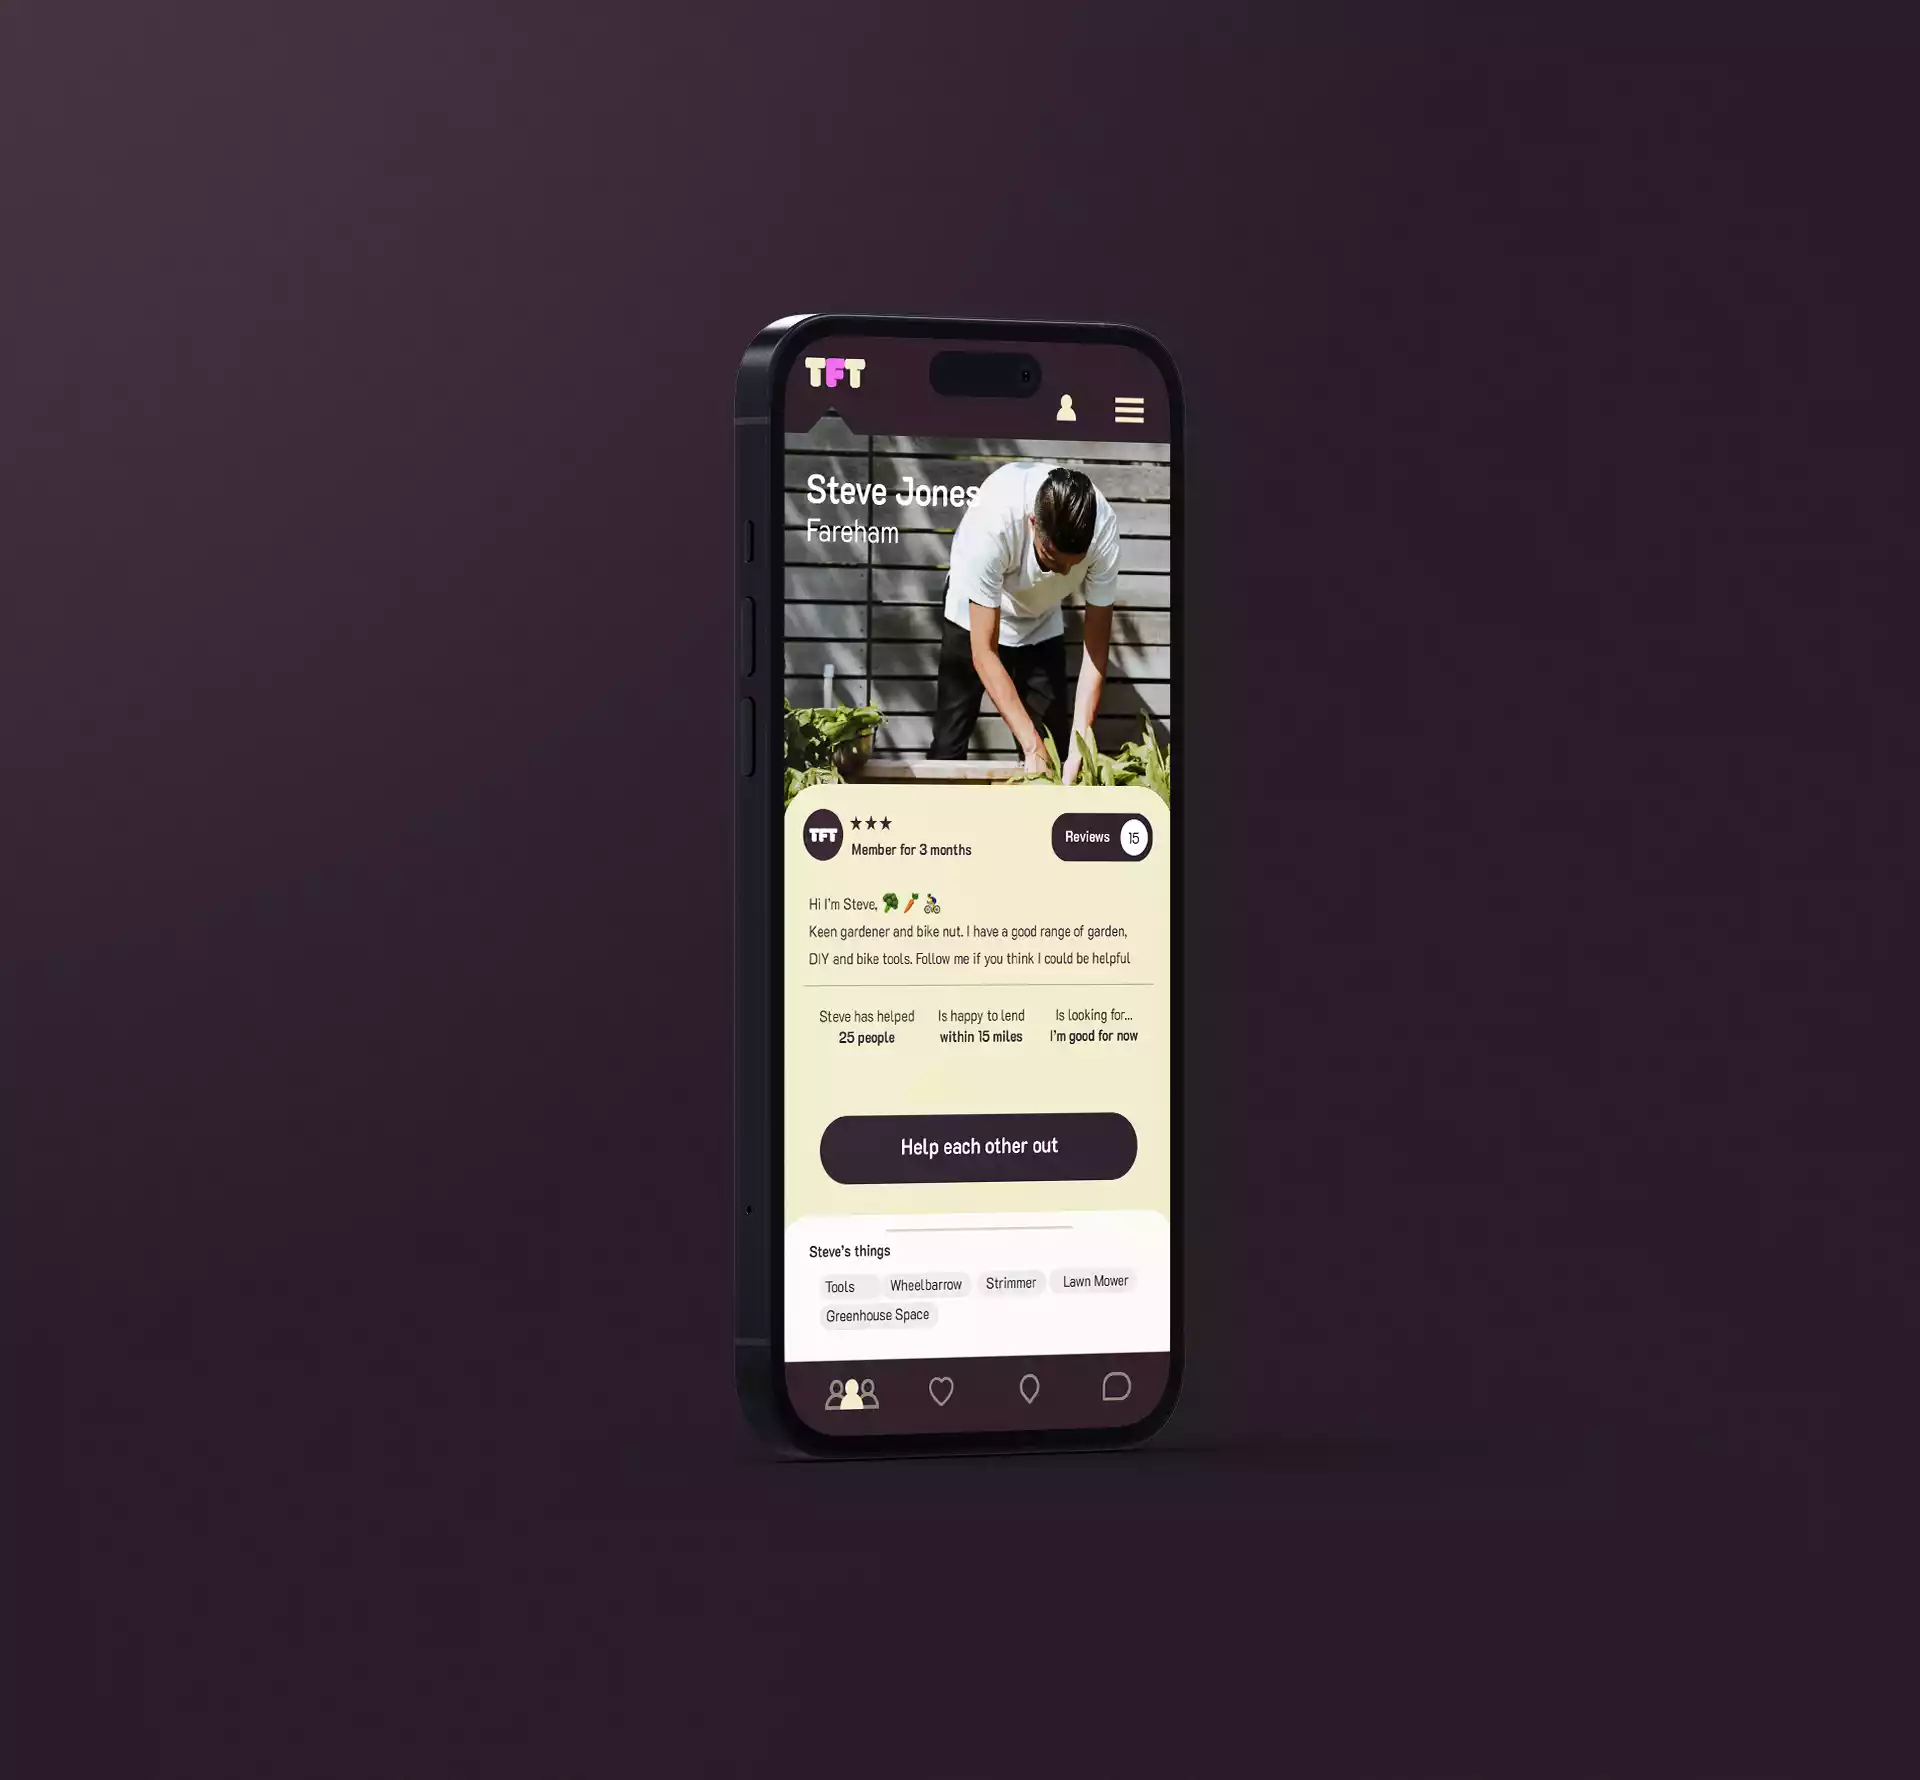 This for that a sharing economy app. Digital experience design by Rodd